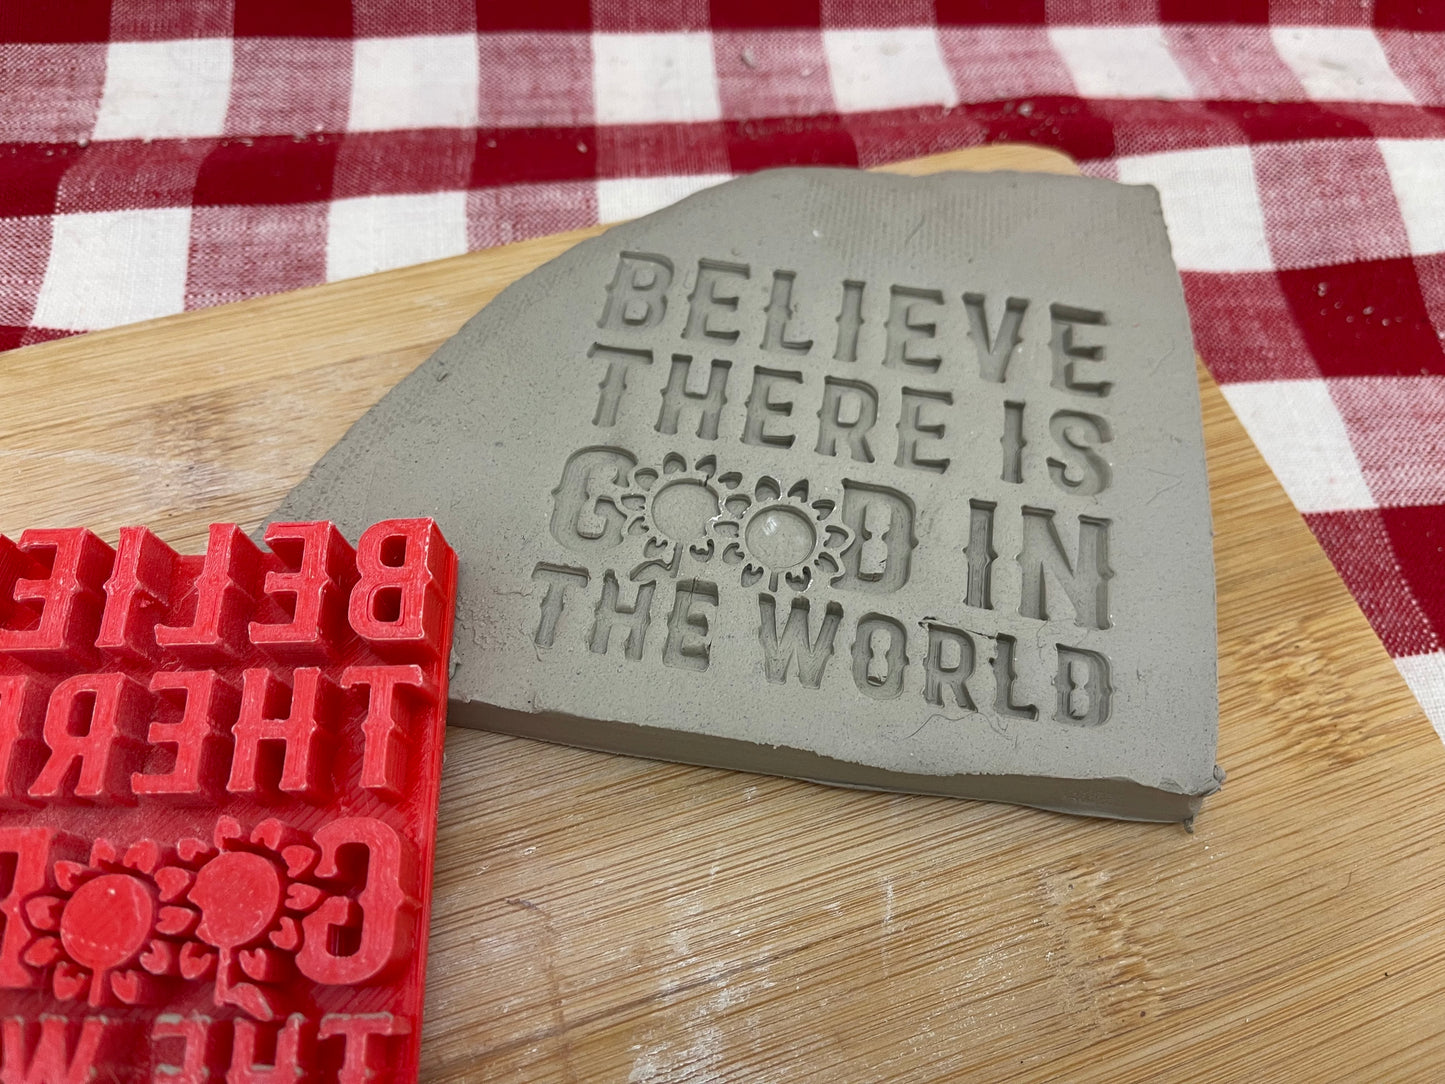 "Believe There is Good in the World" Word Stamp - plastic 3D printed, multiple sizes